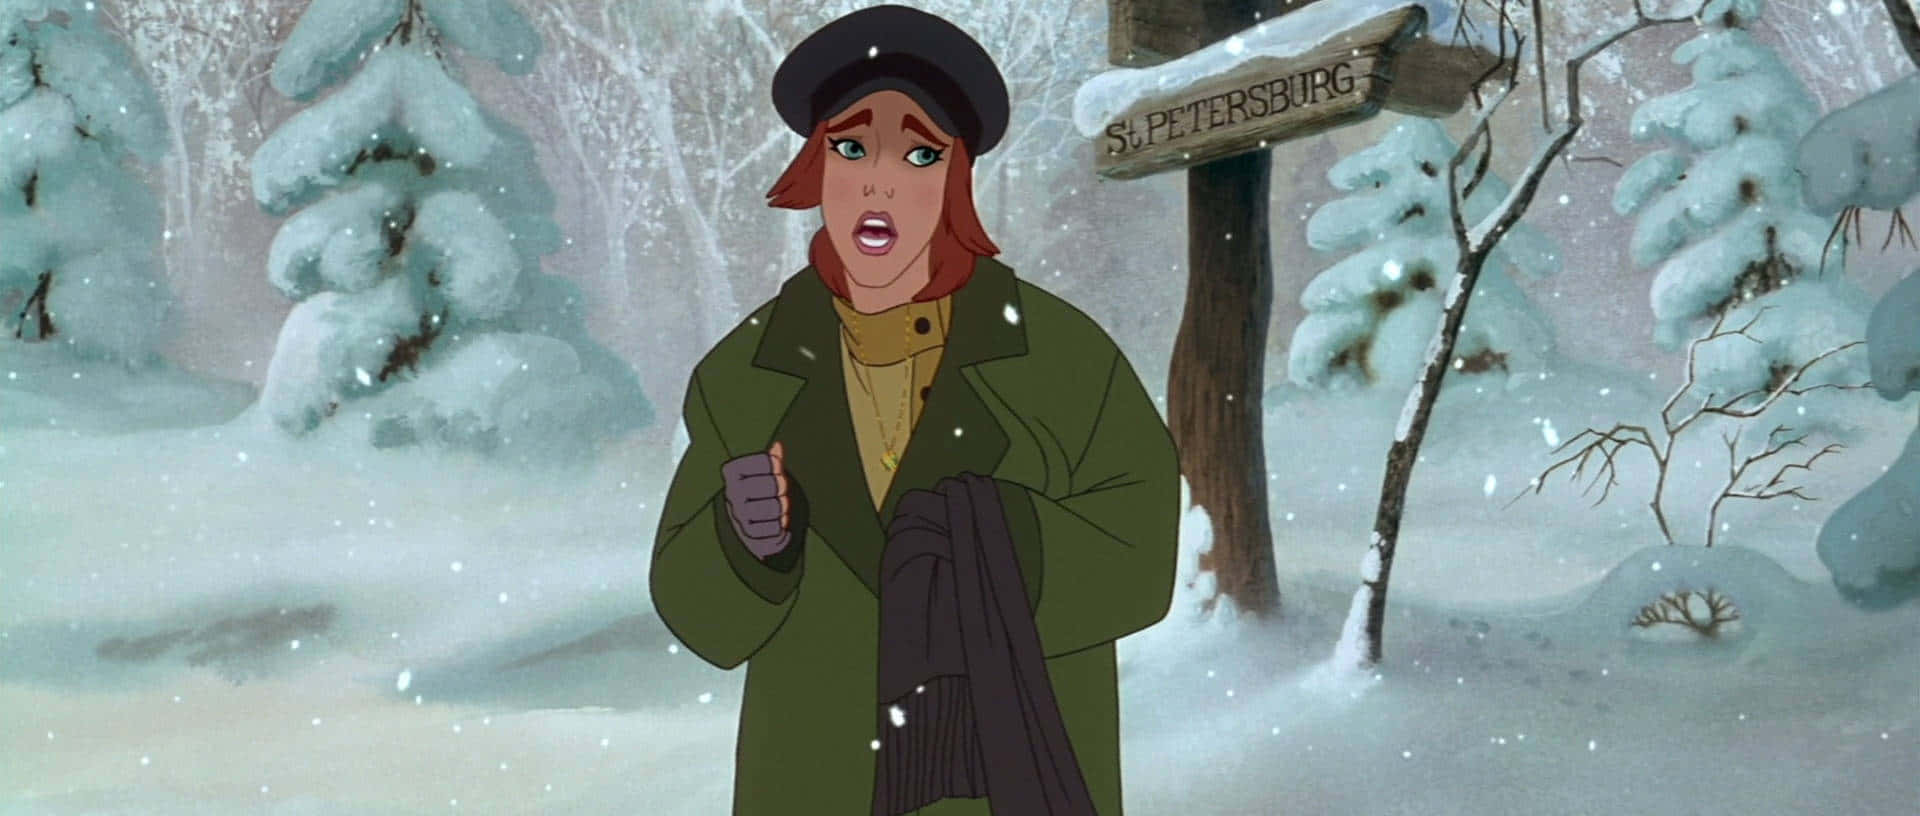 A Cartoon Character In A Coat And Hat Standing In The Snow